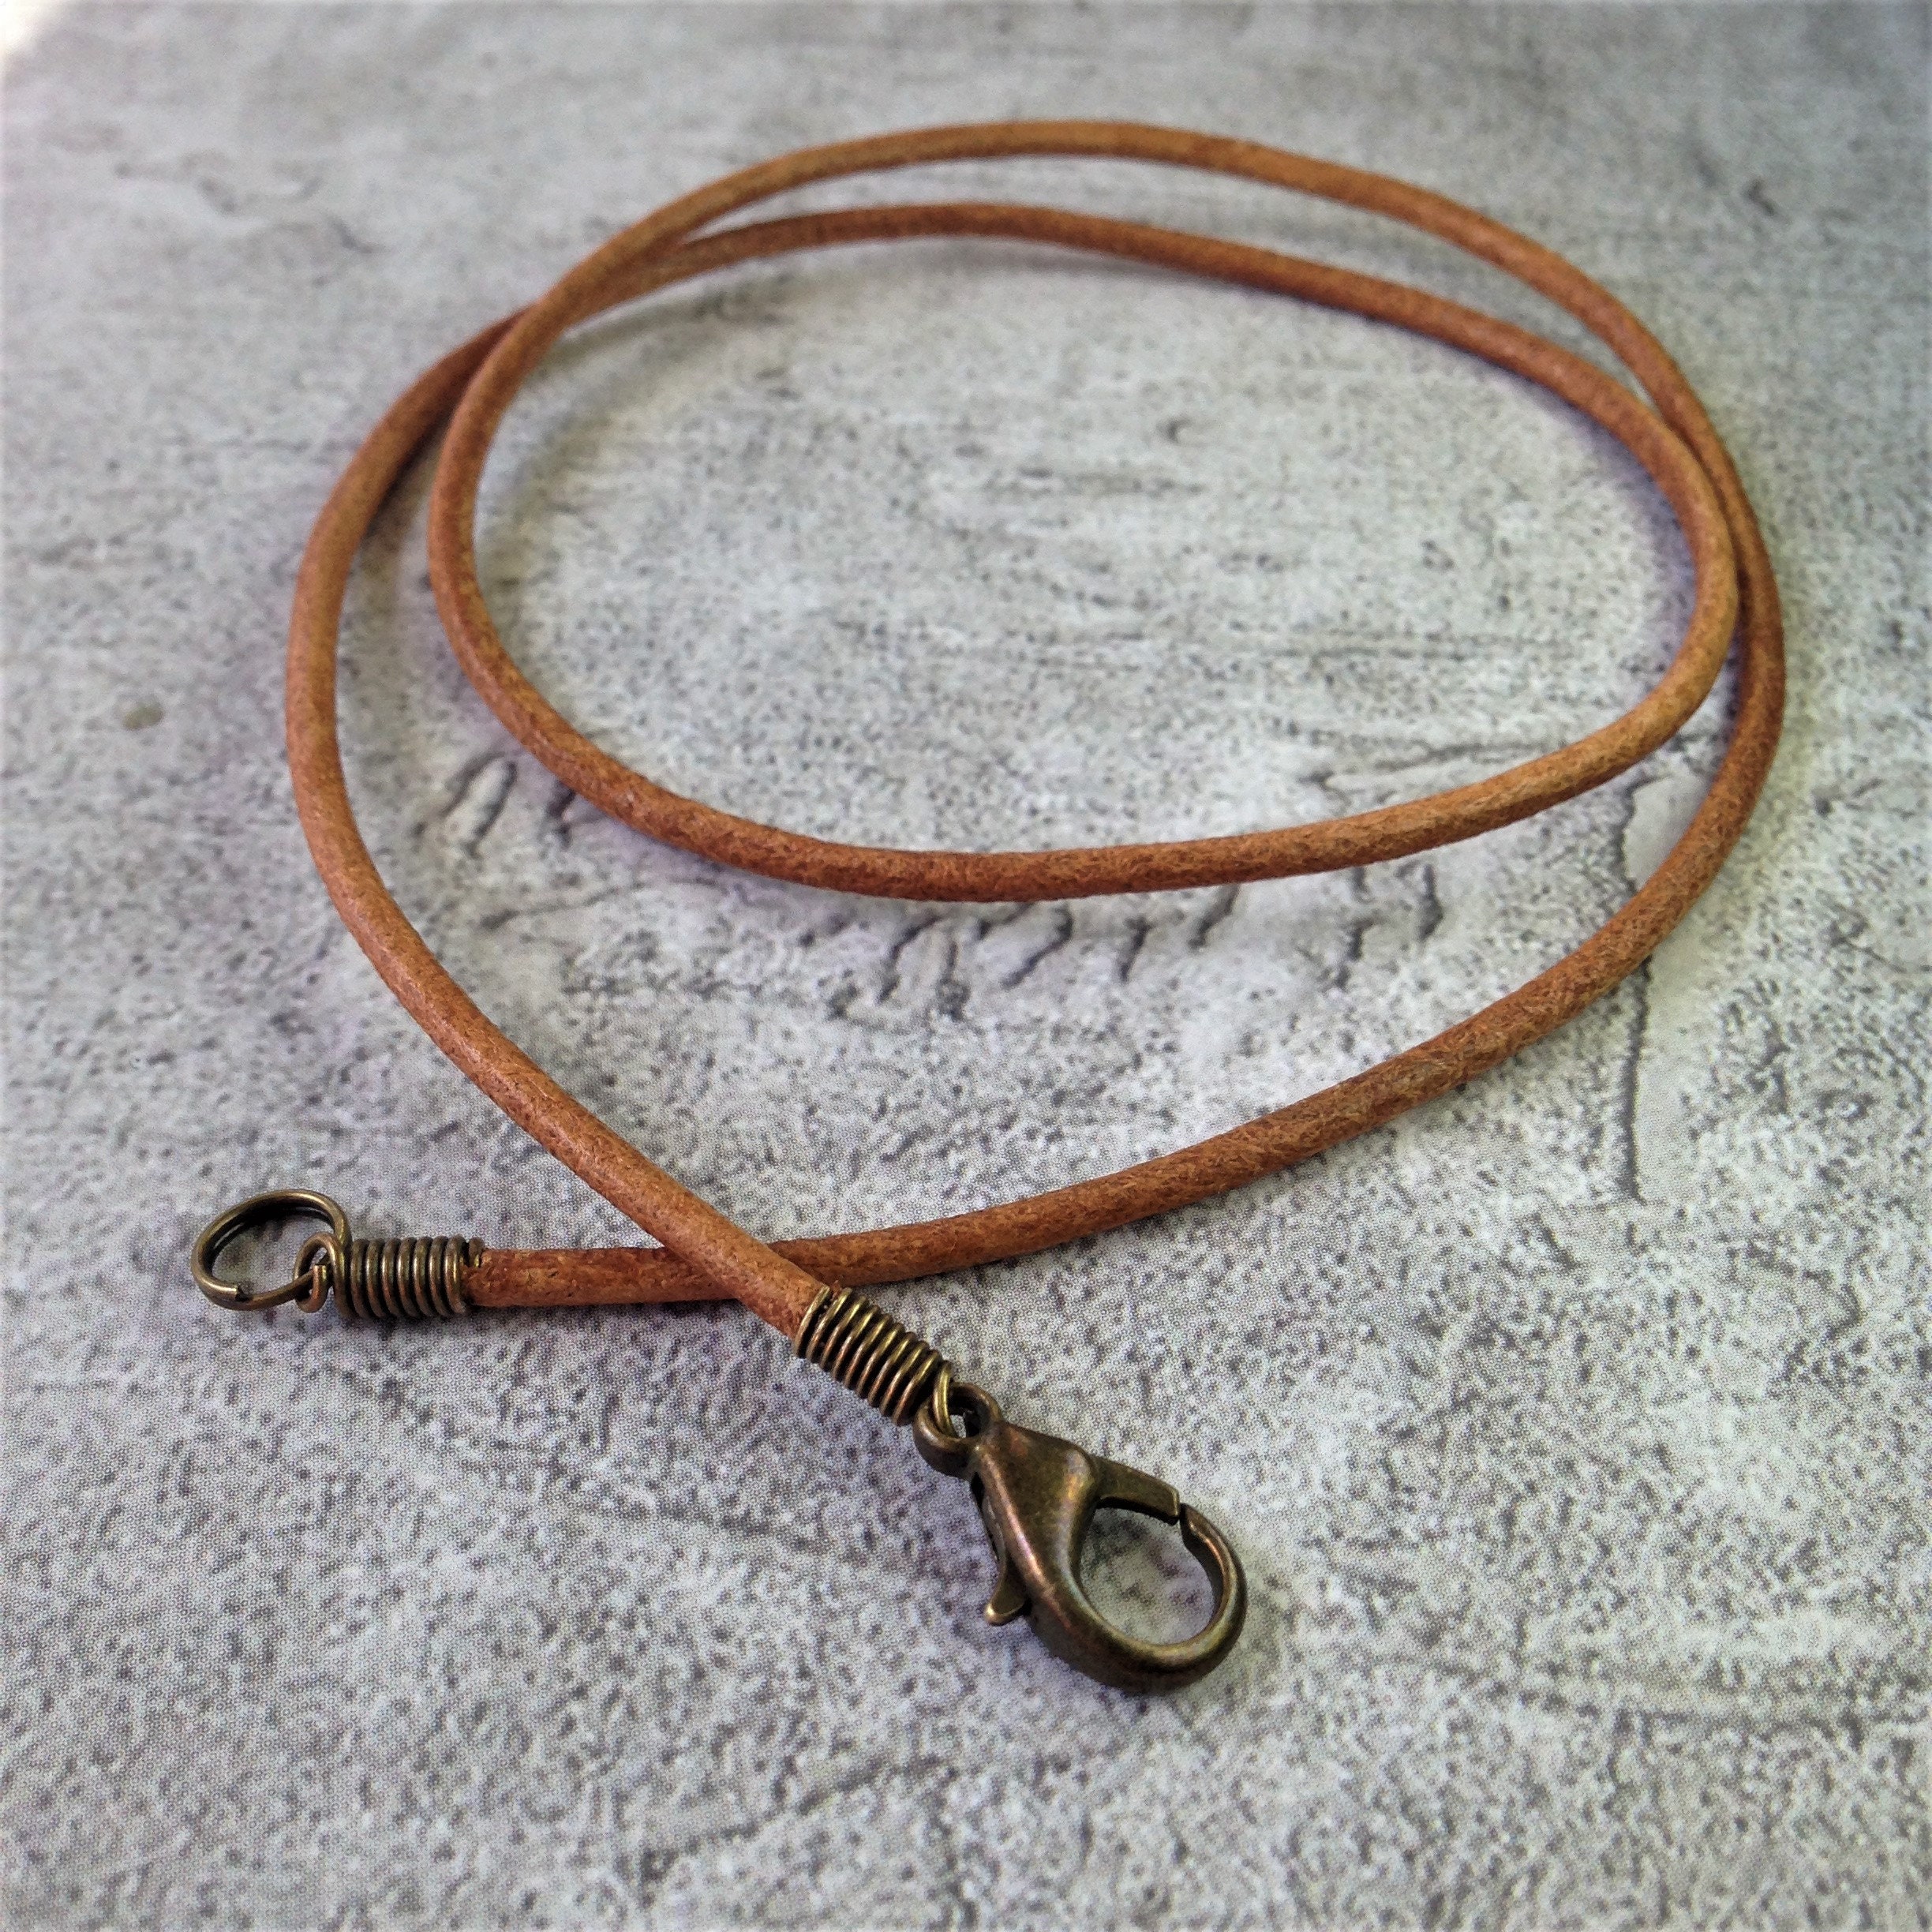 Leather Round Cord / Black Leather Cording — Leather Skins